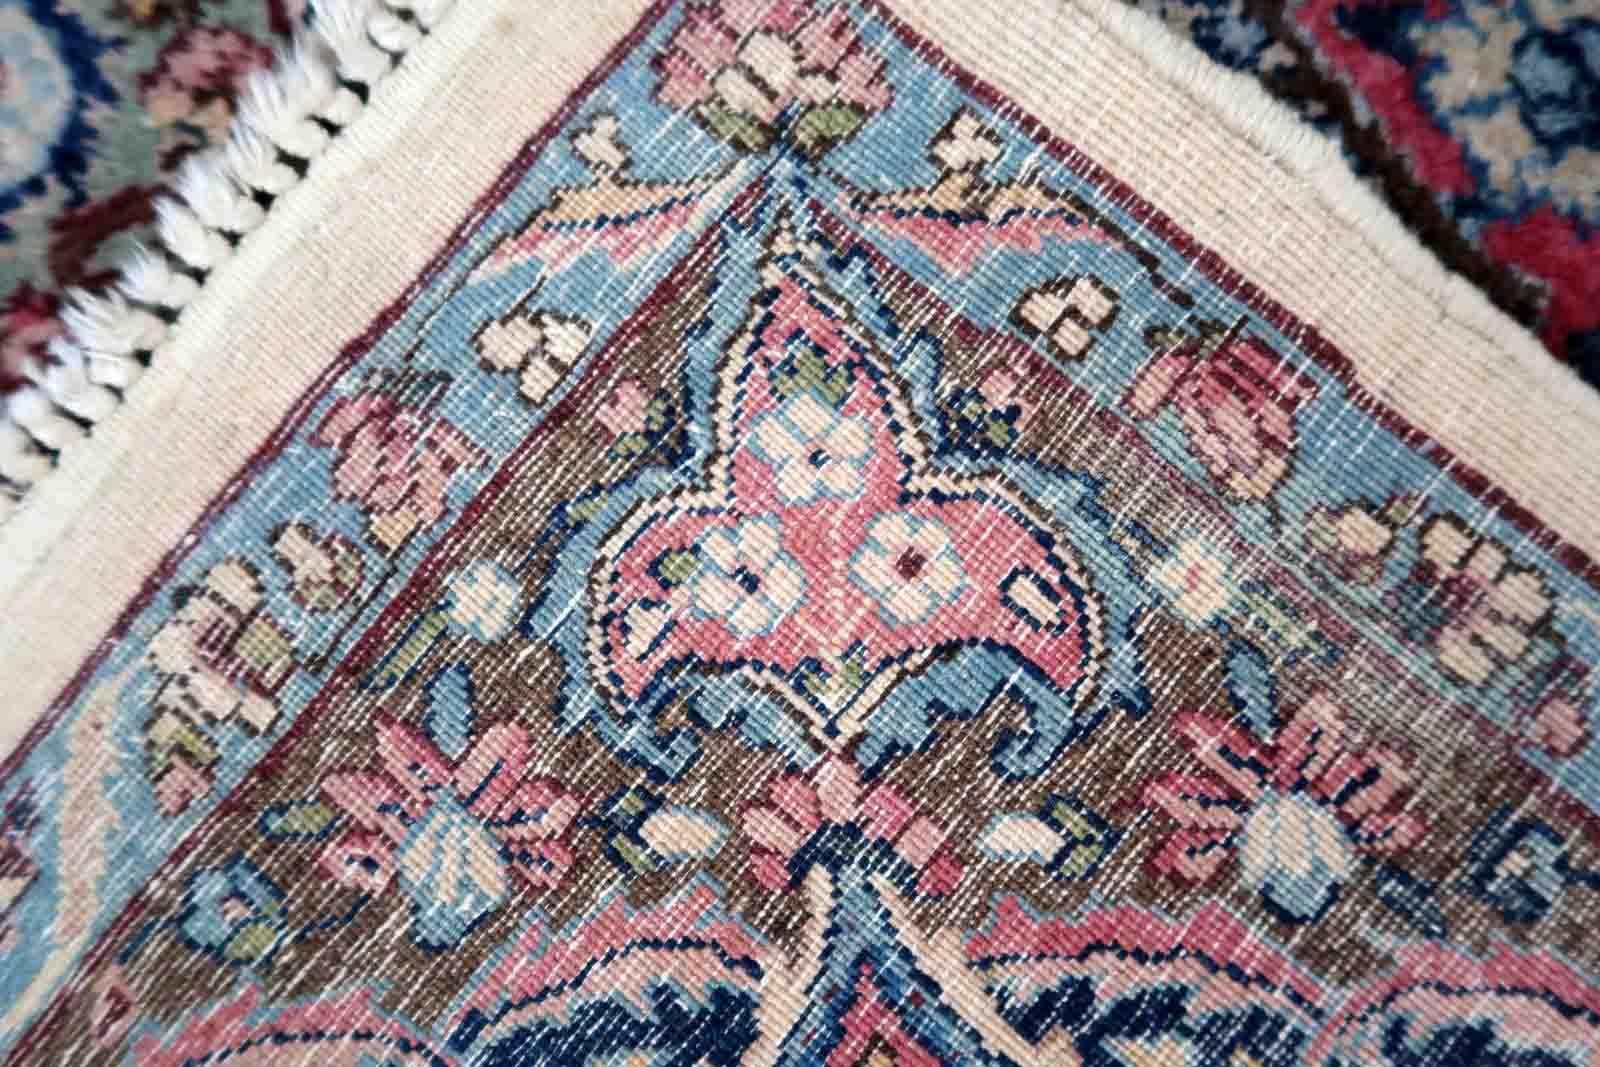 Handmade antique Persian Kerman rug in colorful shades. The rug is in busy floral design. It is from the beginning of 20th century in original good condition.

-condition: original good,

-circa: 1930s,

-size: 7.8' x 10.4' (240cm x